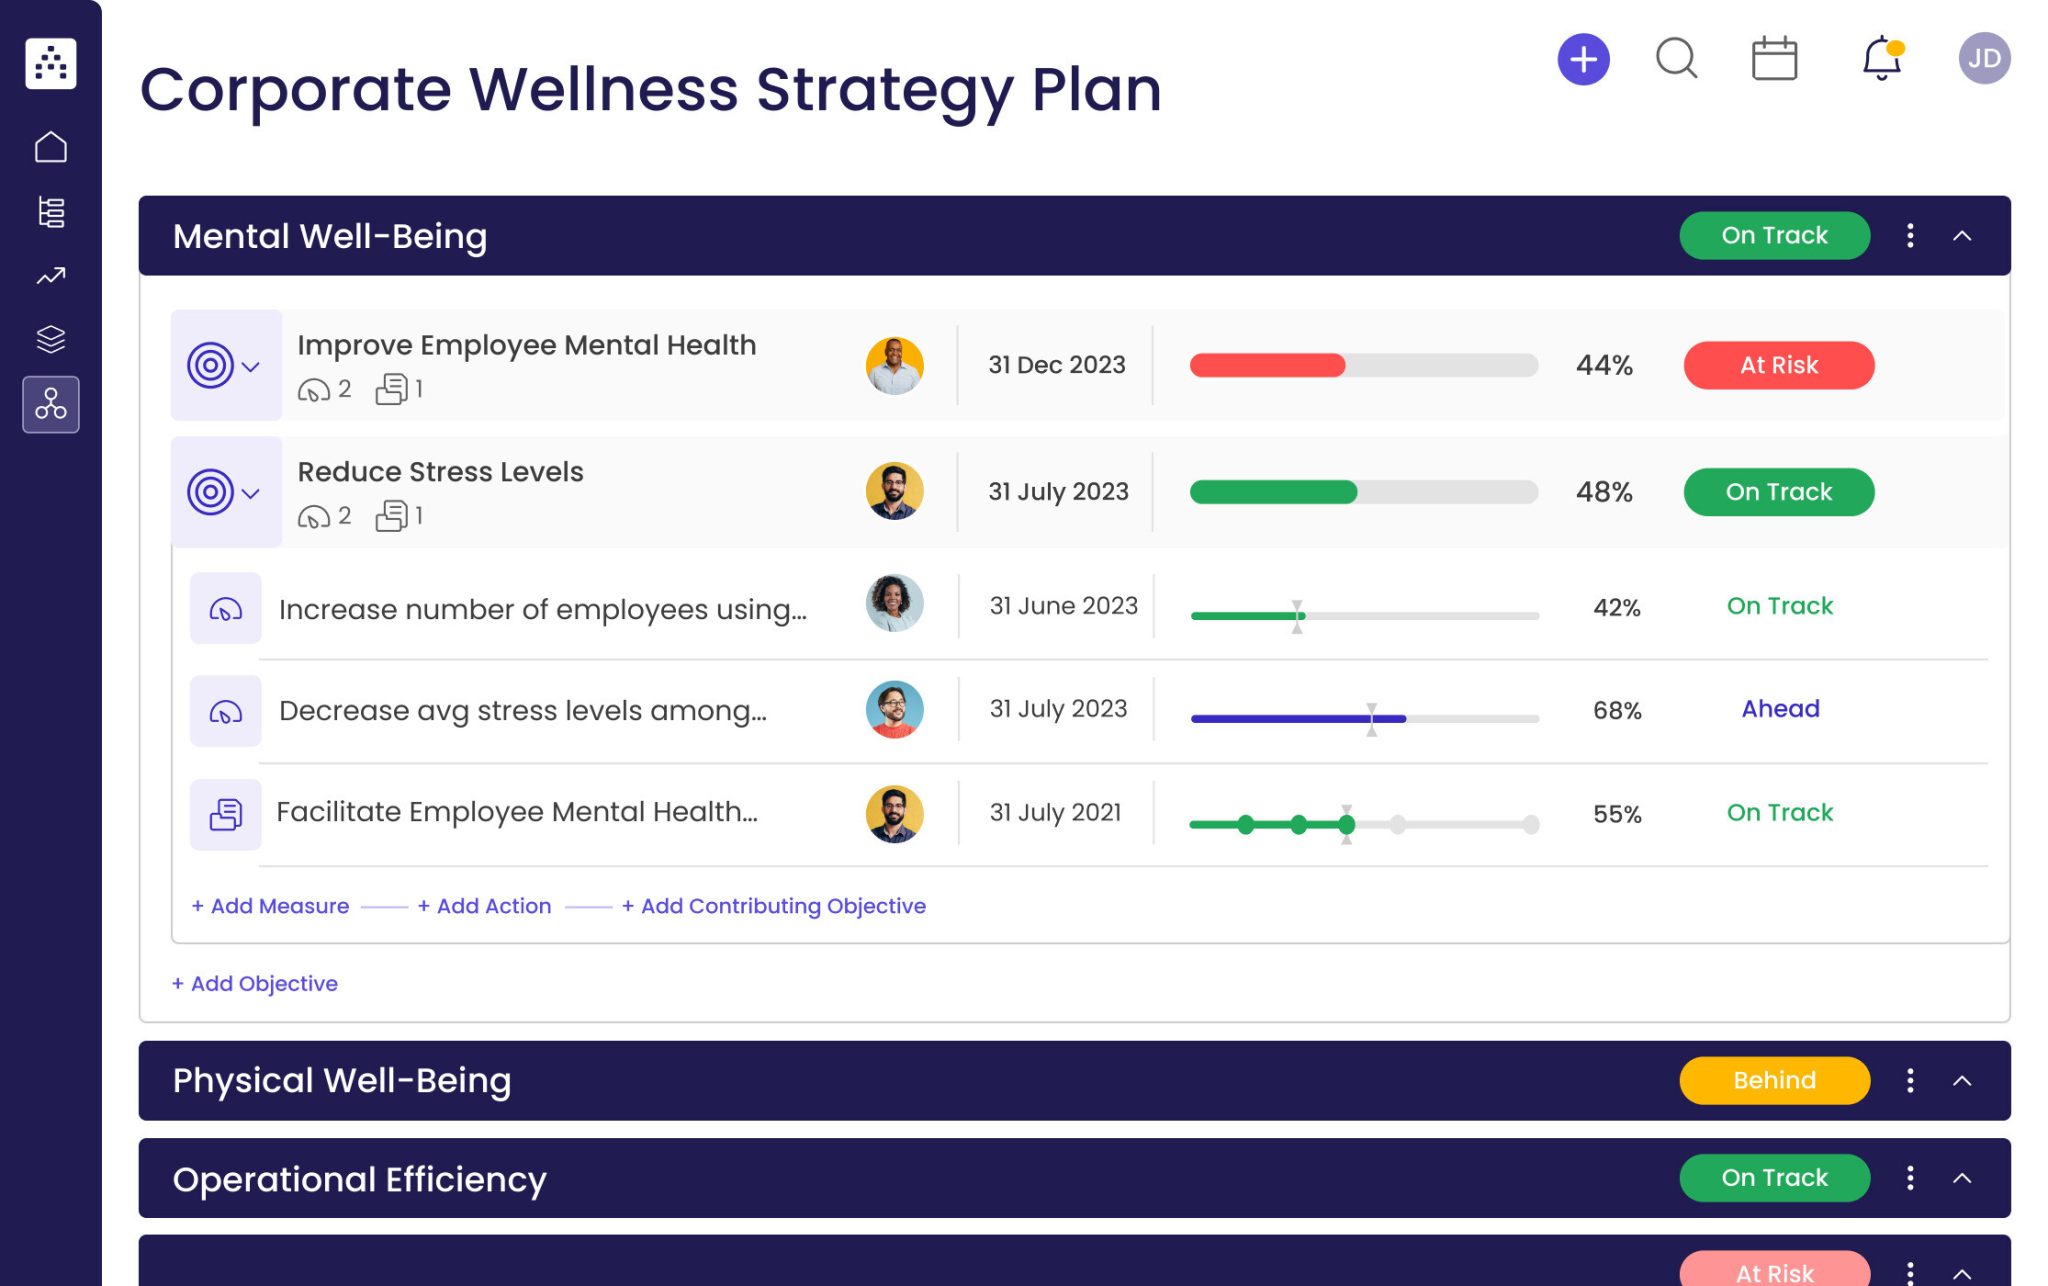 health and safety strategic plan template, healthcare strategic plan template, behavioral health strategic plan template, employee wellness strategic plan, hospital strategic plan template